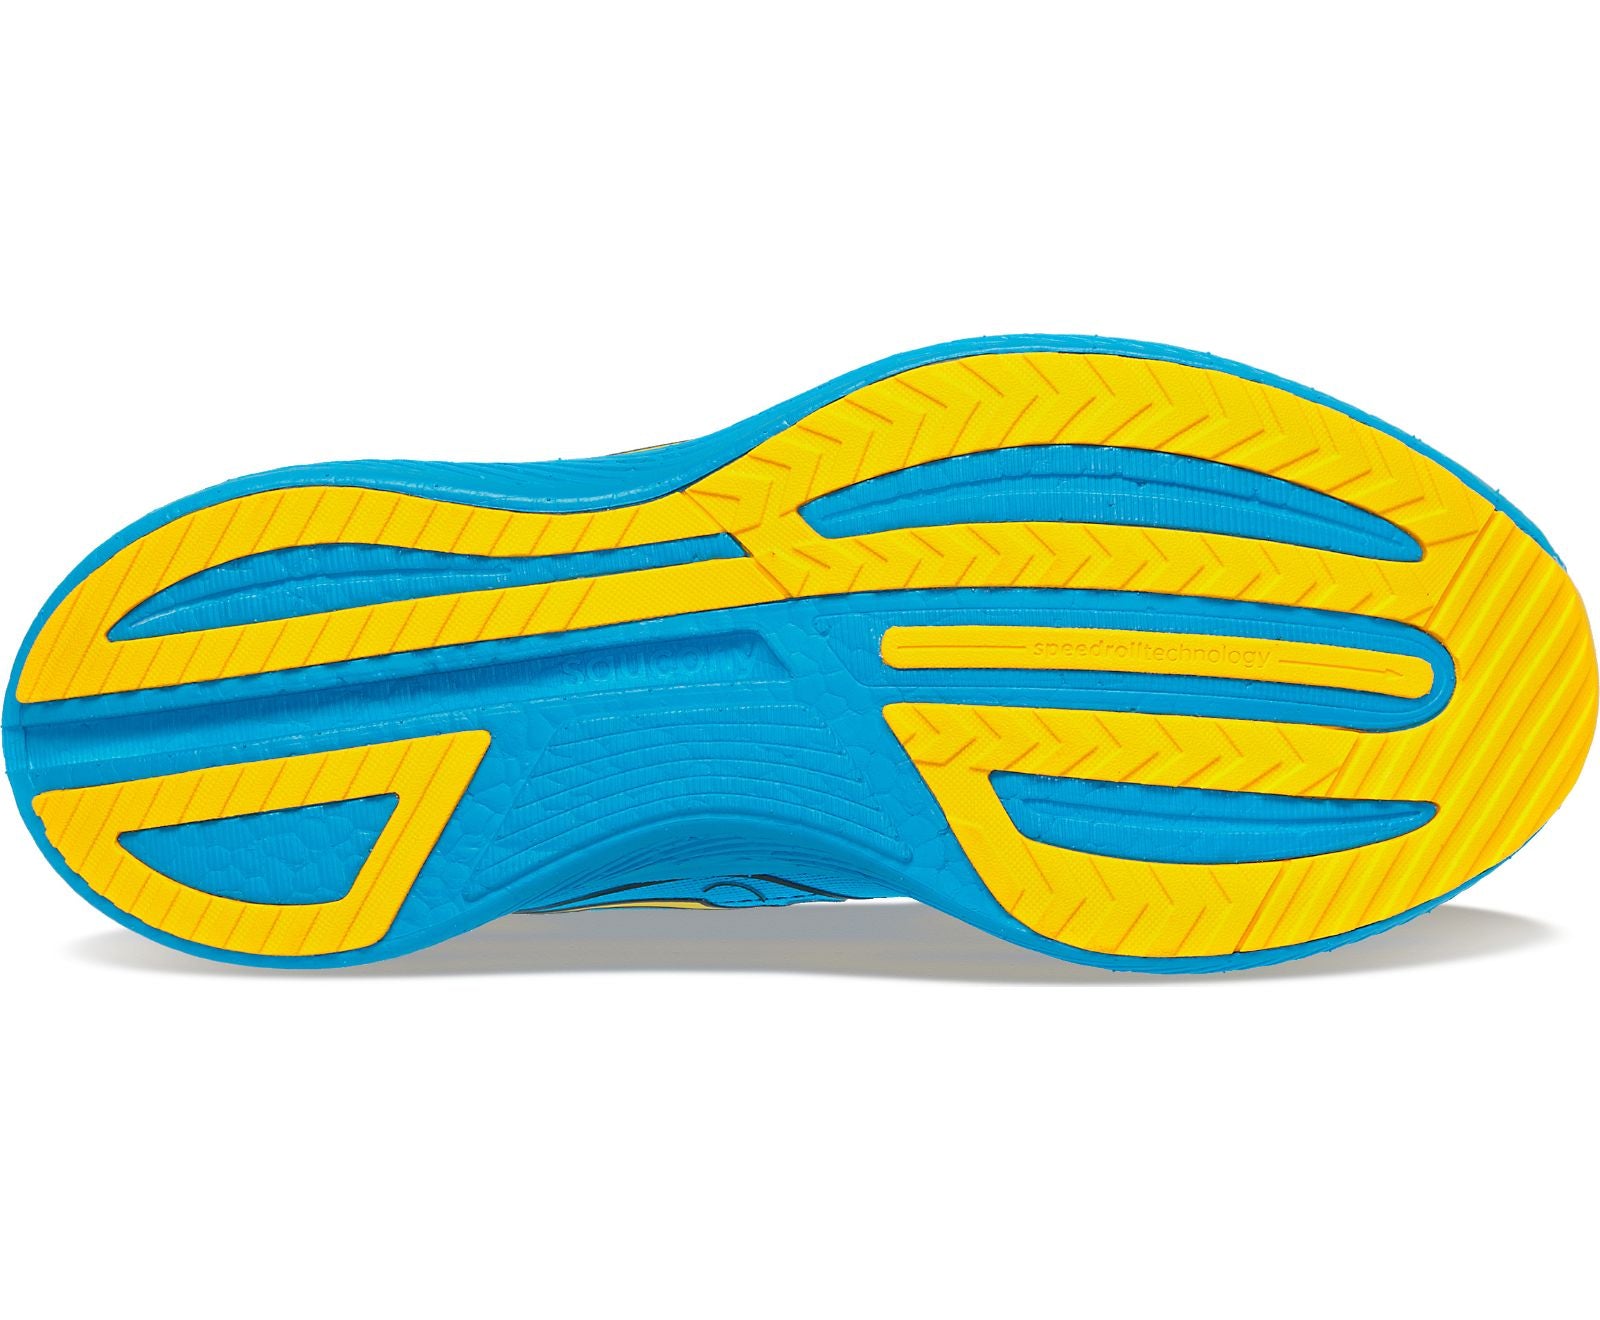 Bottom (outer sole) view of the Men's Endorphin Speed 3 by Saucony in the color Ocean/Vizigold